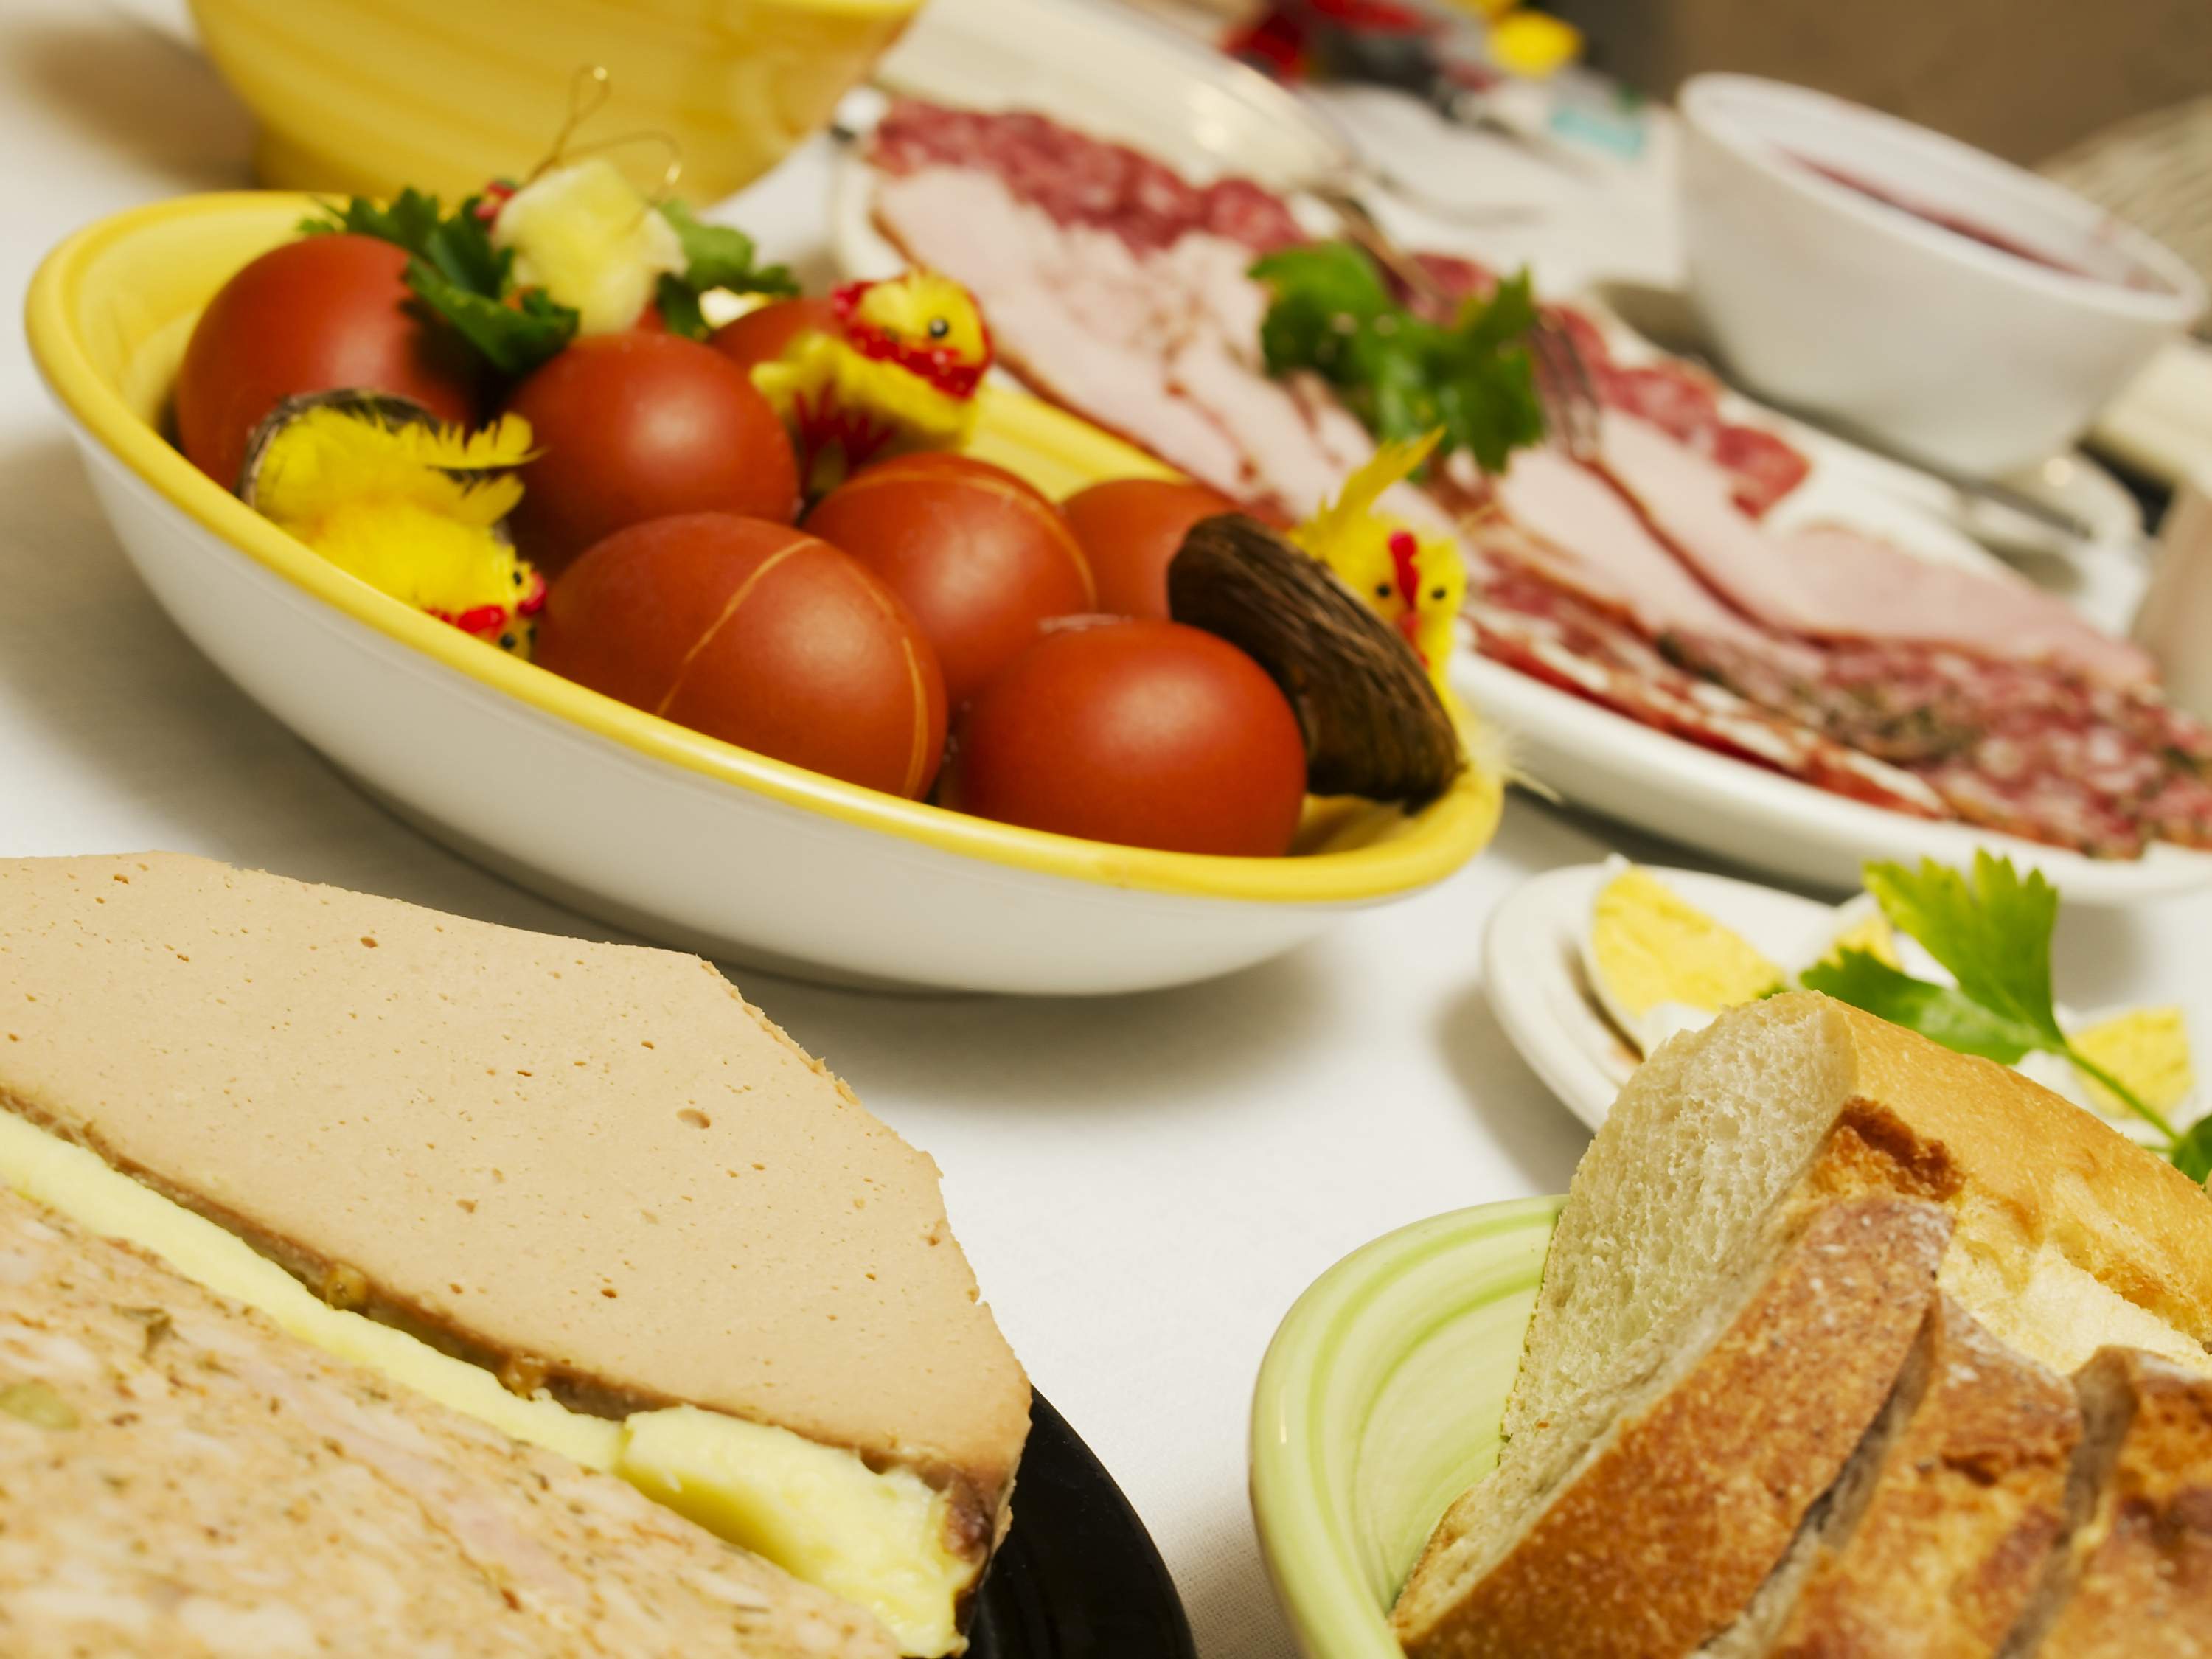 Easter meal 7.79% cheaper in 2014, claims consumer protection center